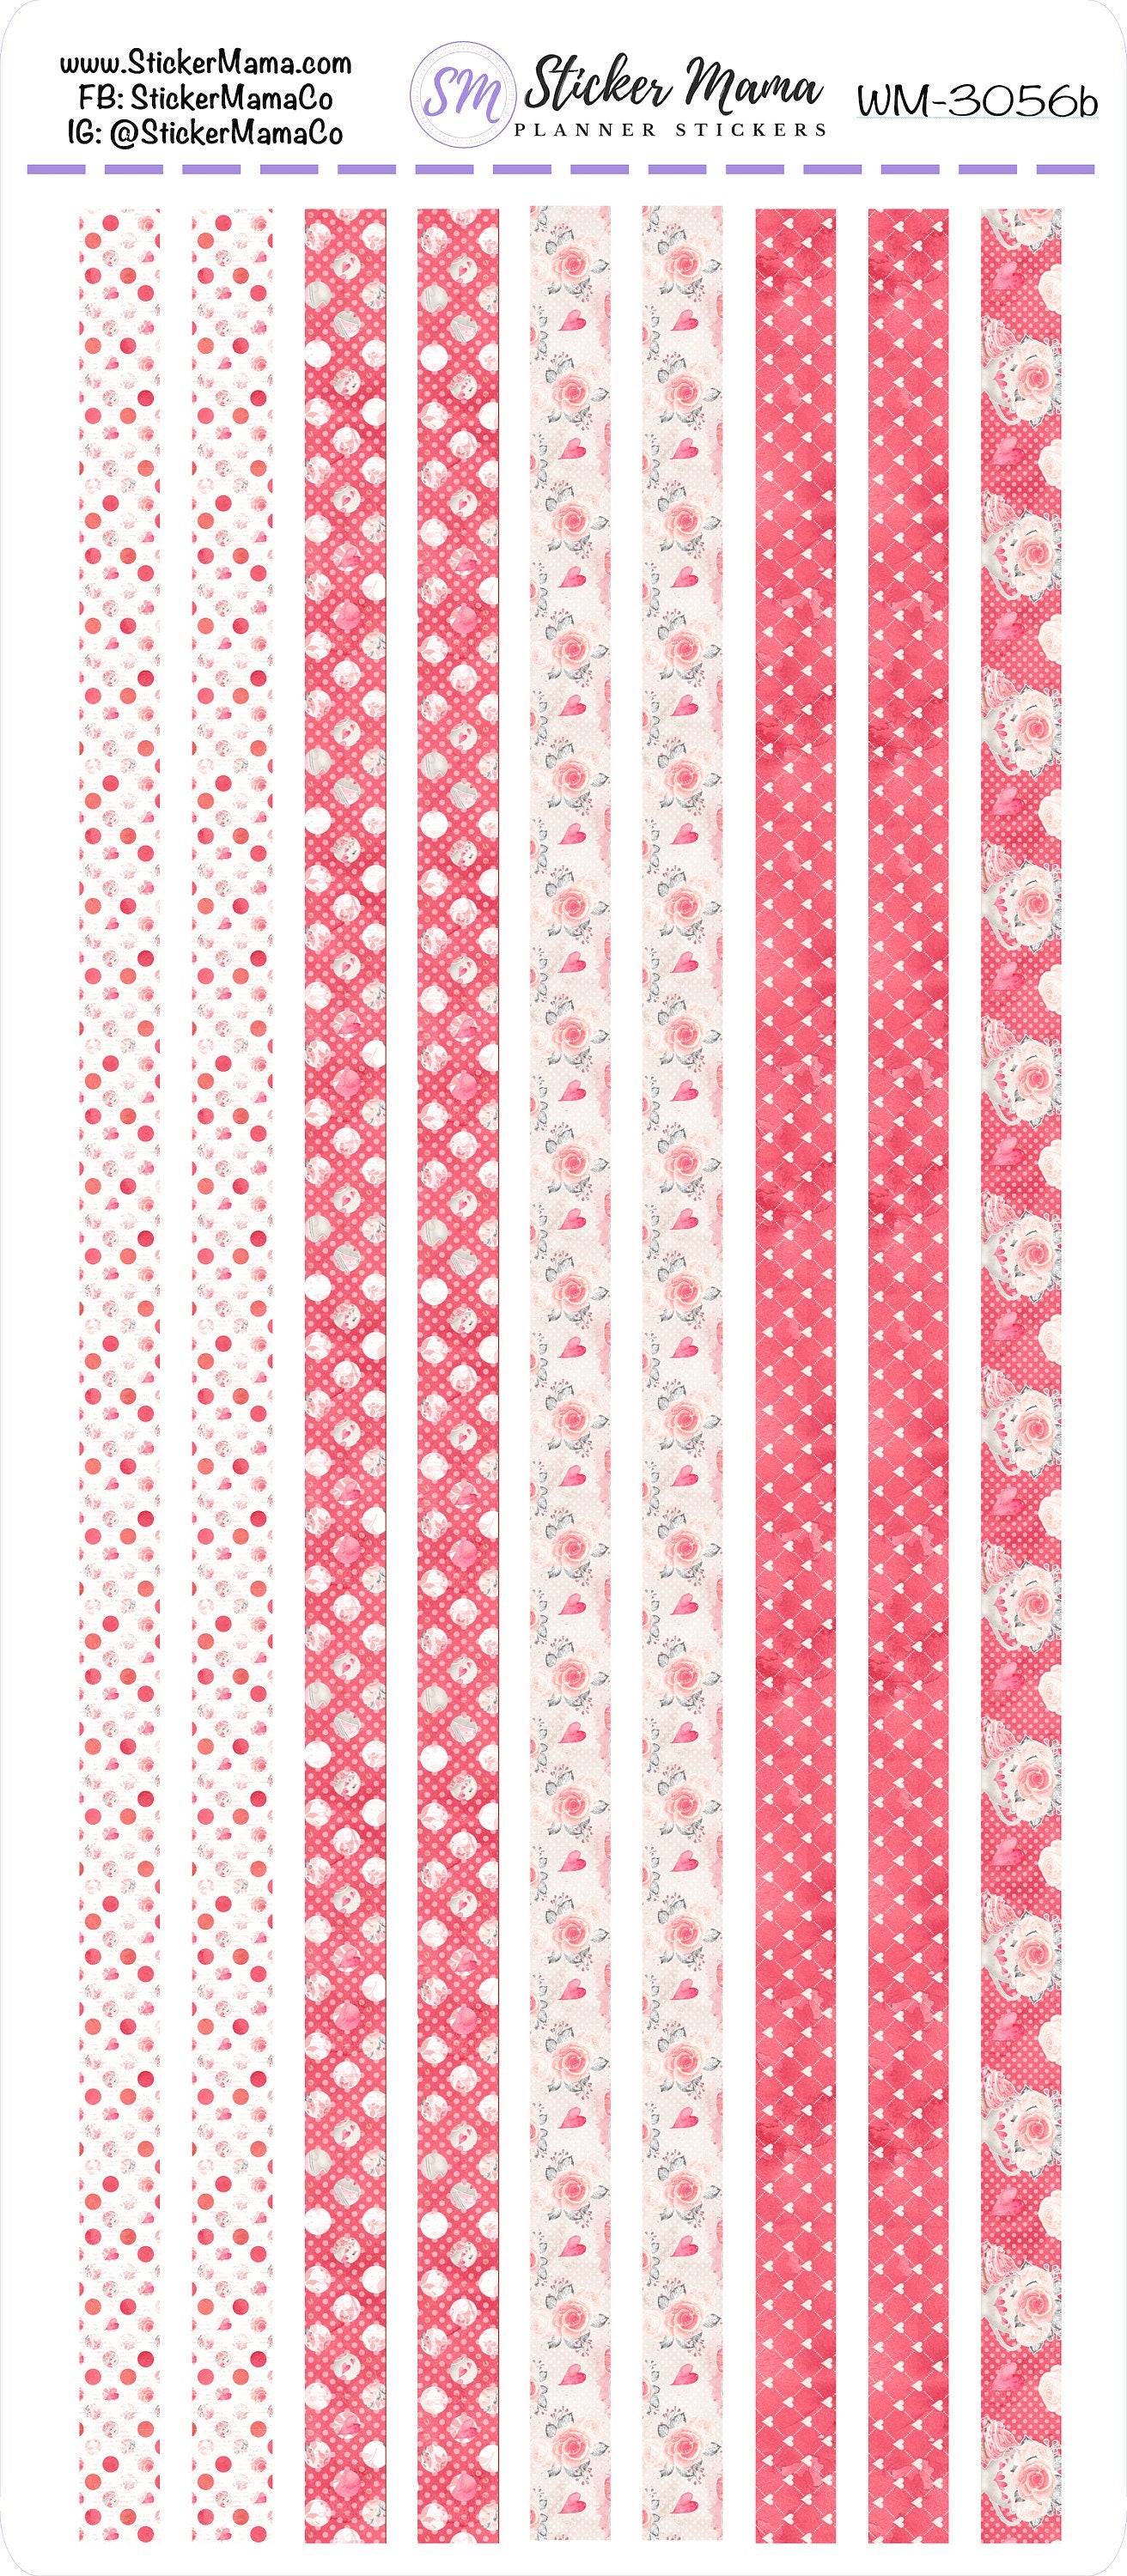 W-3056 - WASHI STICKERS - Sweet Valentine's - Planner Stickers - Washi for Planners